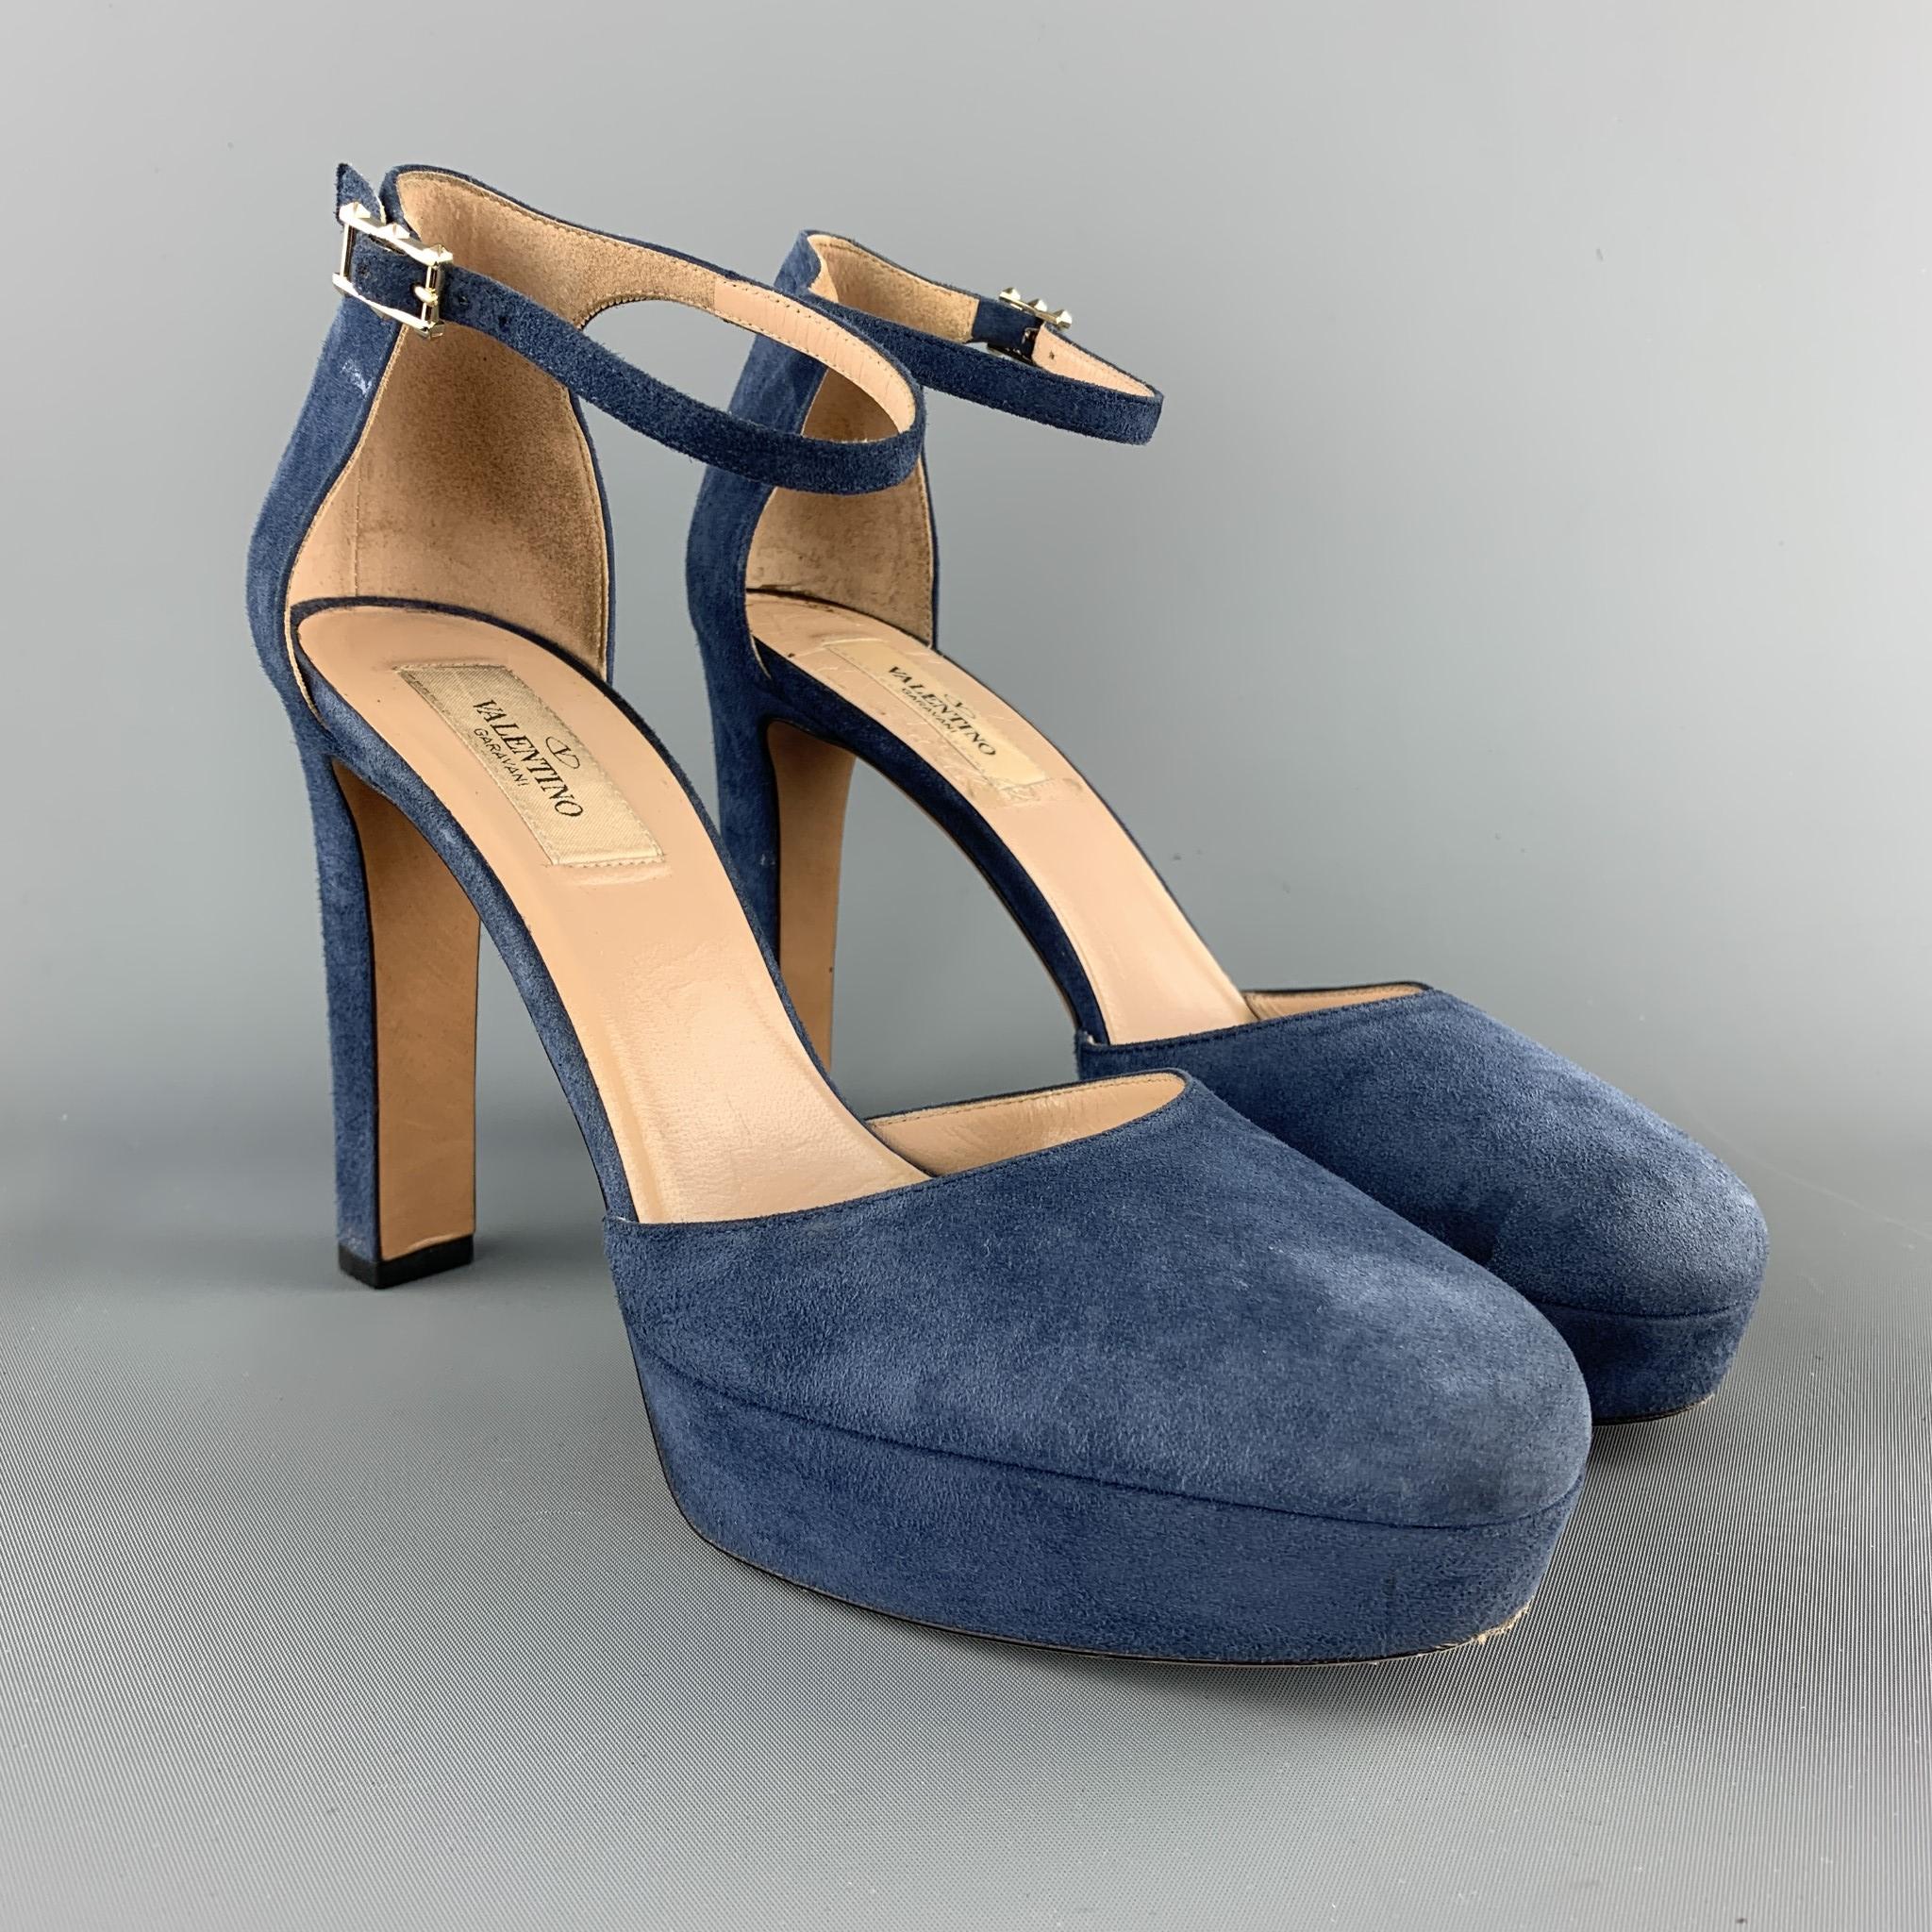 VALENTINO platform pumps come in denim blue suede with cutout sides, covered platform and heel, and ankle strap with rockstud back. Made in Italy.

Good Pre-Owned Condition.
Marked: IT 38

Heel: 4.5 in.
Platform: 1 in.
